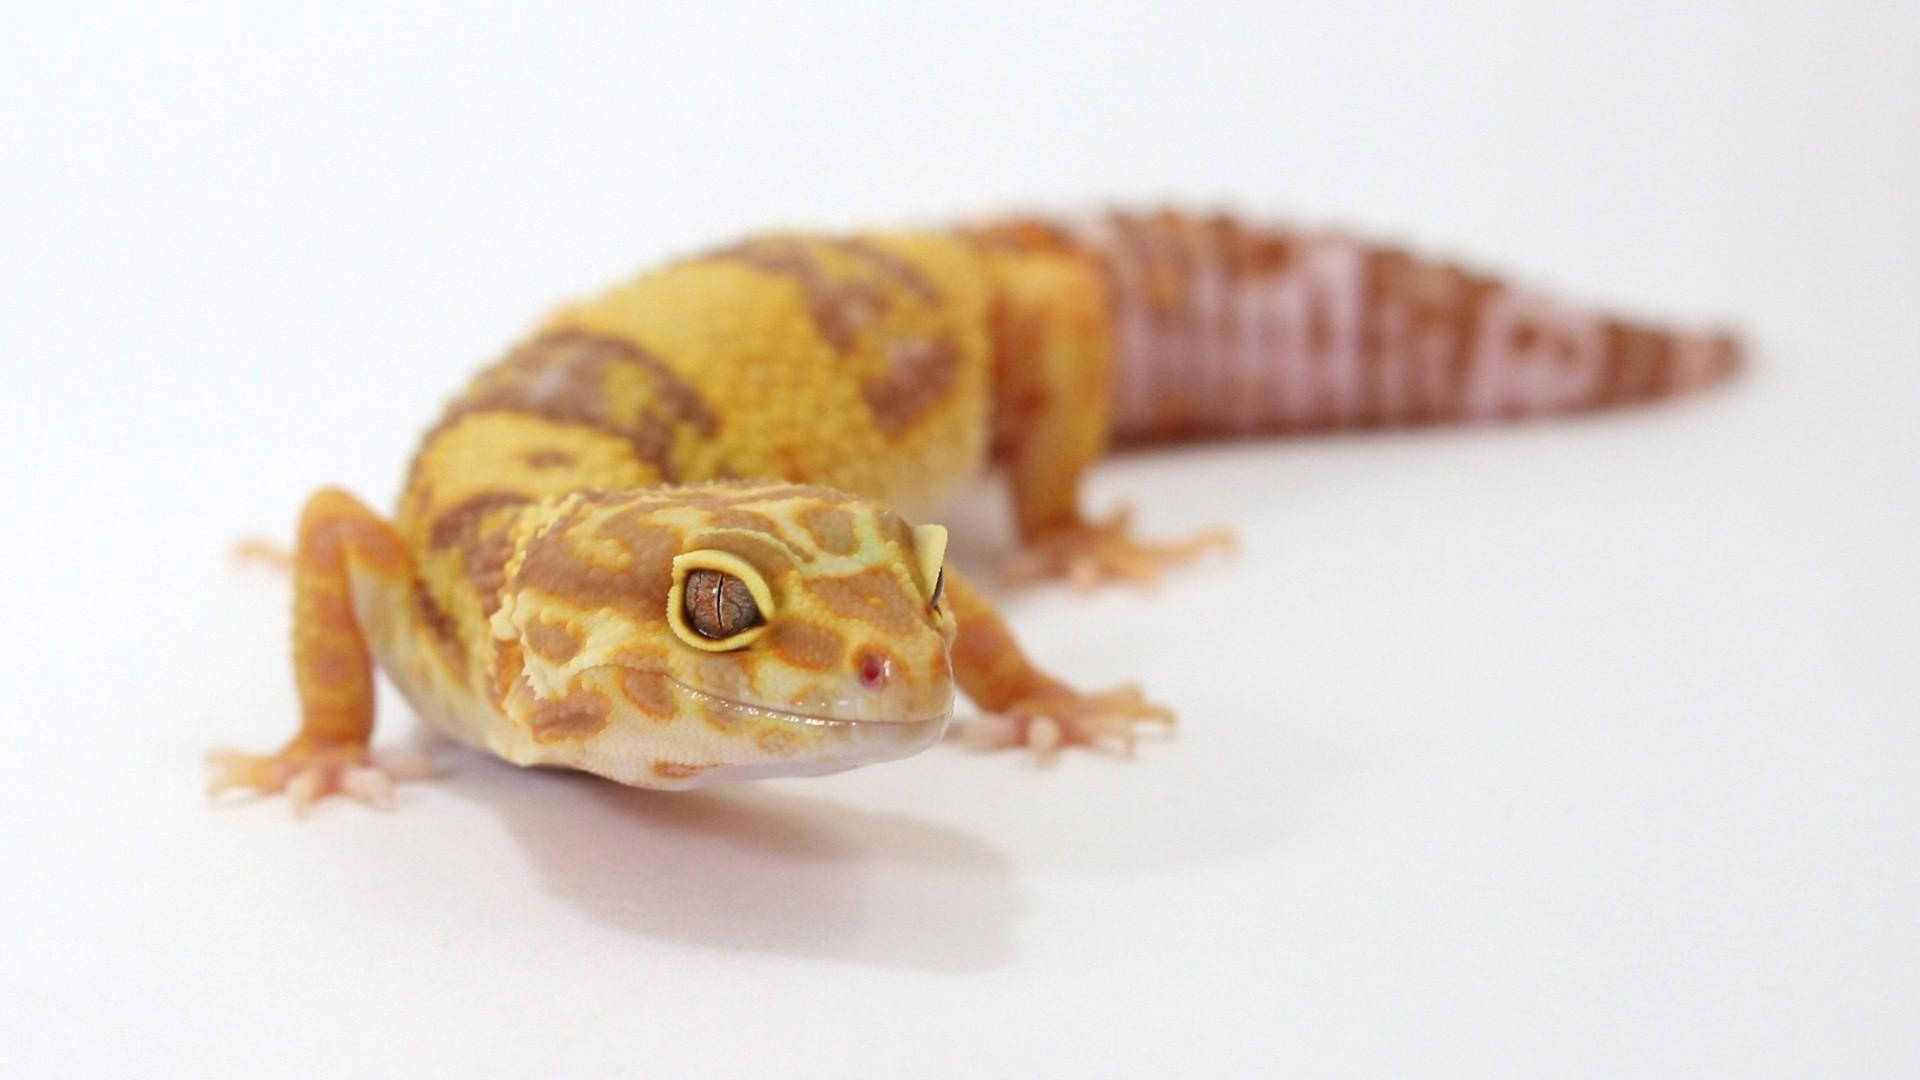 A close-up of a leopard gecko found in the wild Wallpaper